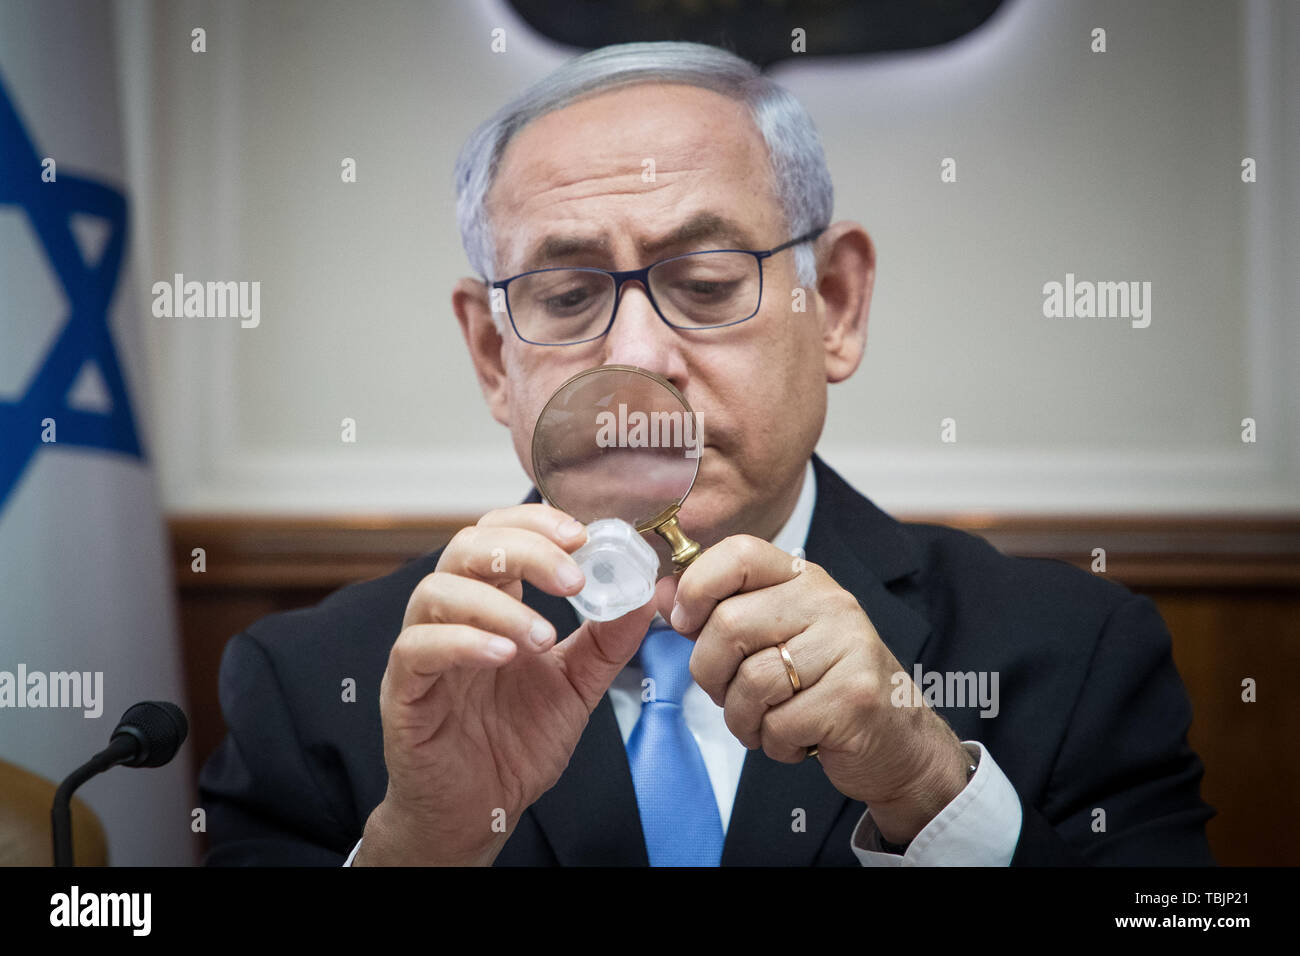 Jerusalem. 2nd June, 2019. Israeli Prime Minister Benjamin Netanyahu attends the weekly cabinet meeting in Jerusalem, June 2, 2019. The Israeli parliament, known as the Knesset, dissolved itself last Wednesday and scheduled another general election for mid-September of this year. The development came after Israeli Prime Minister Benjamin Netanyahu failed to form a coalition government. Credit: JINI/Yonatan Sindel/Xinhua/Alamy Live News Stock Photo